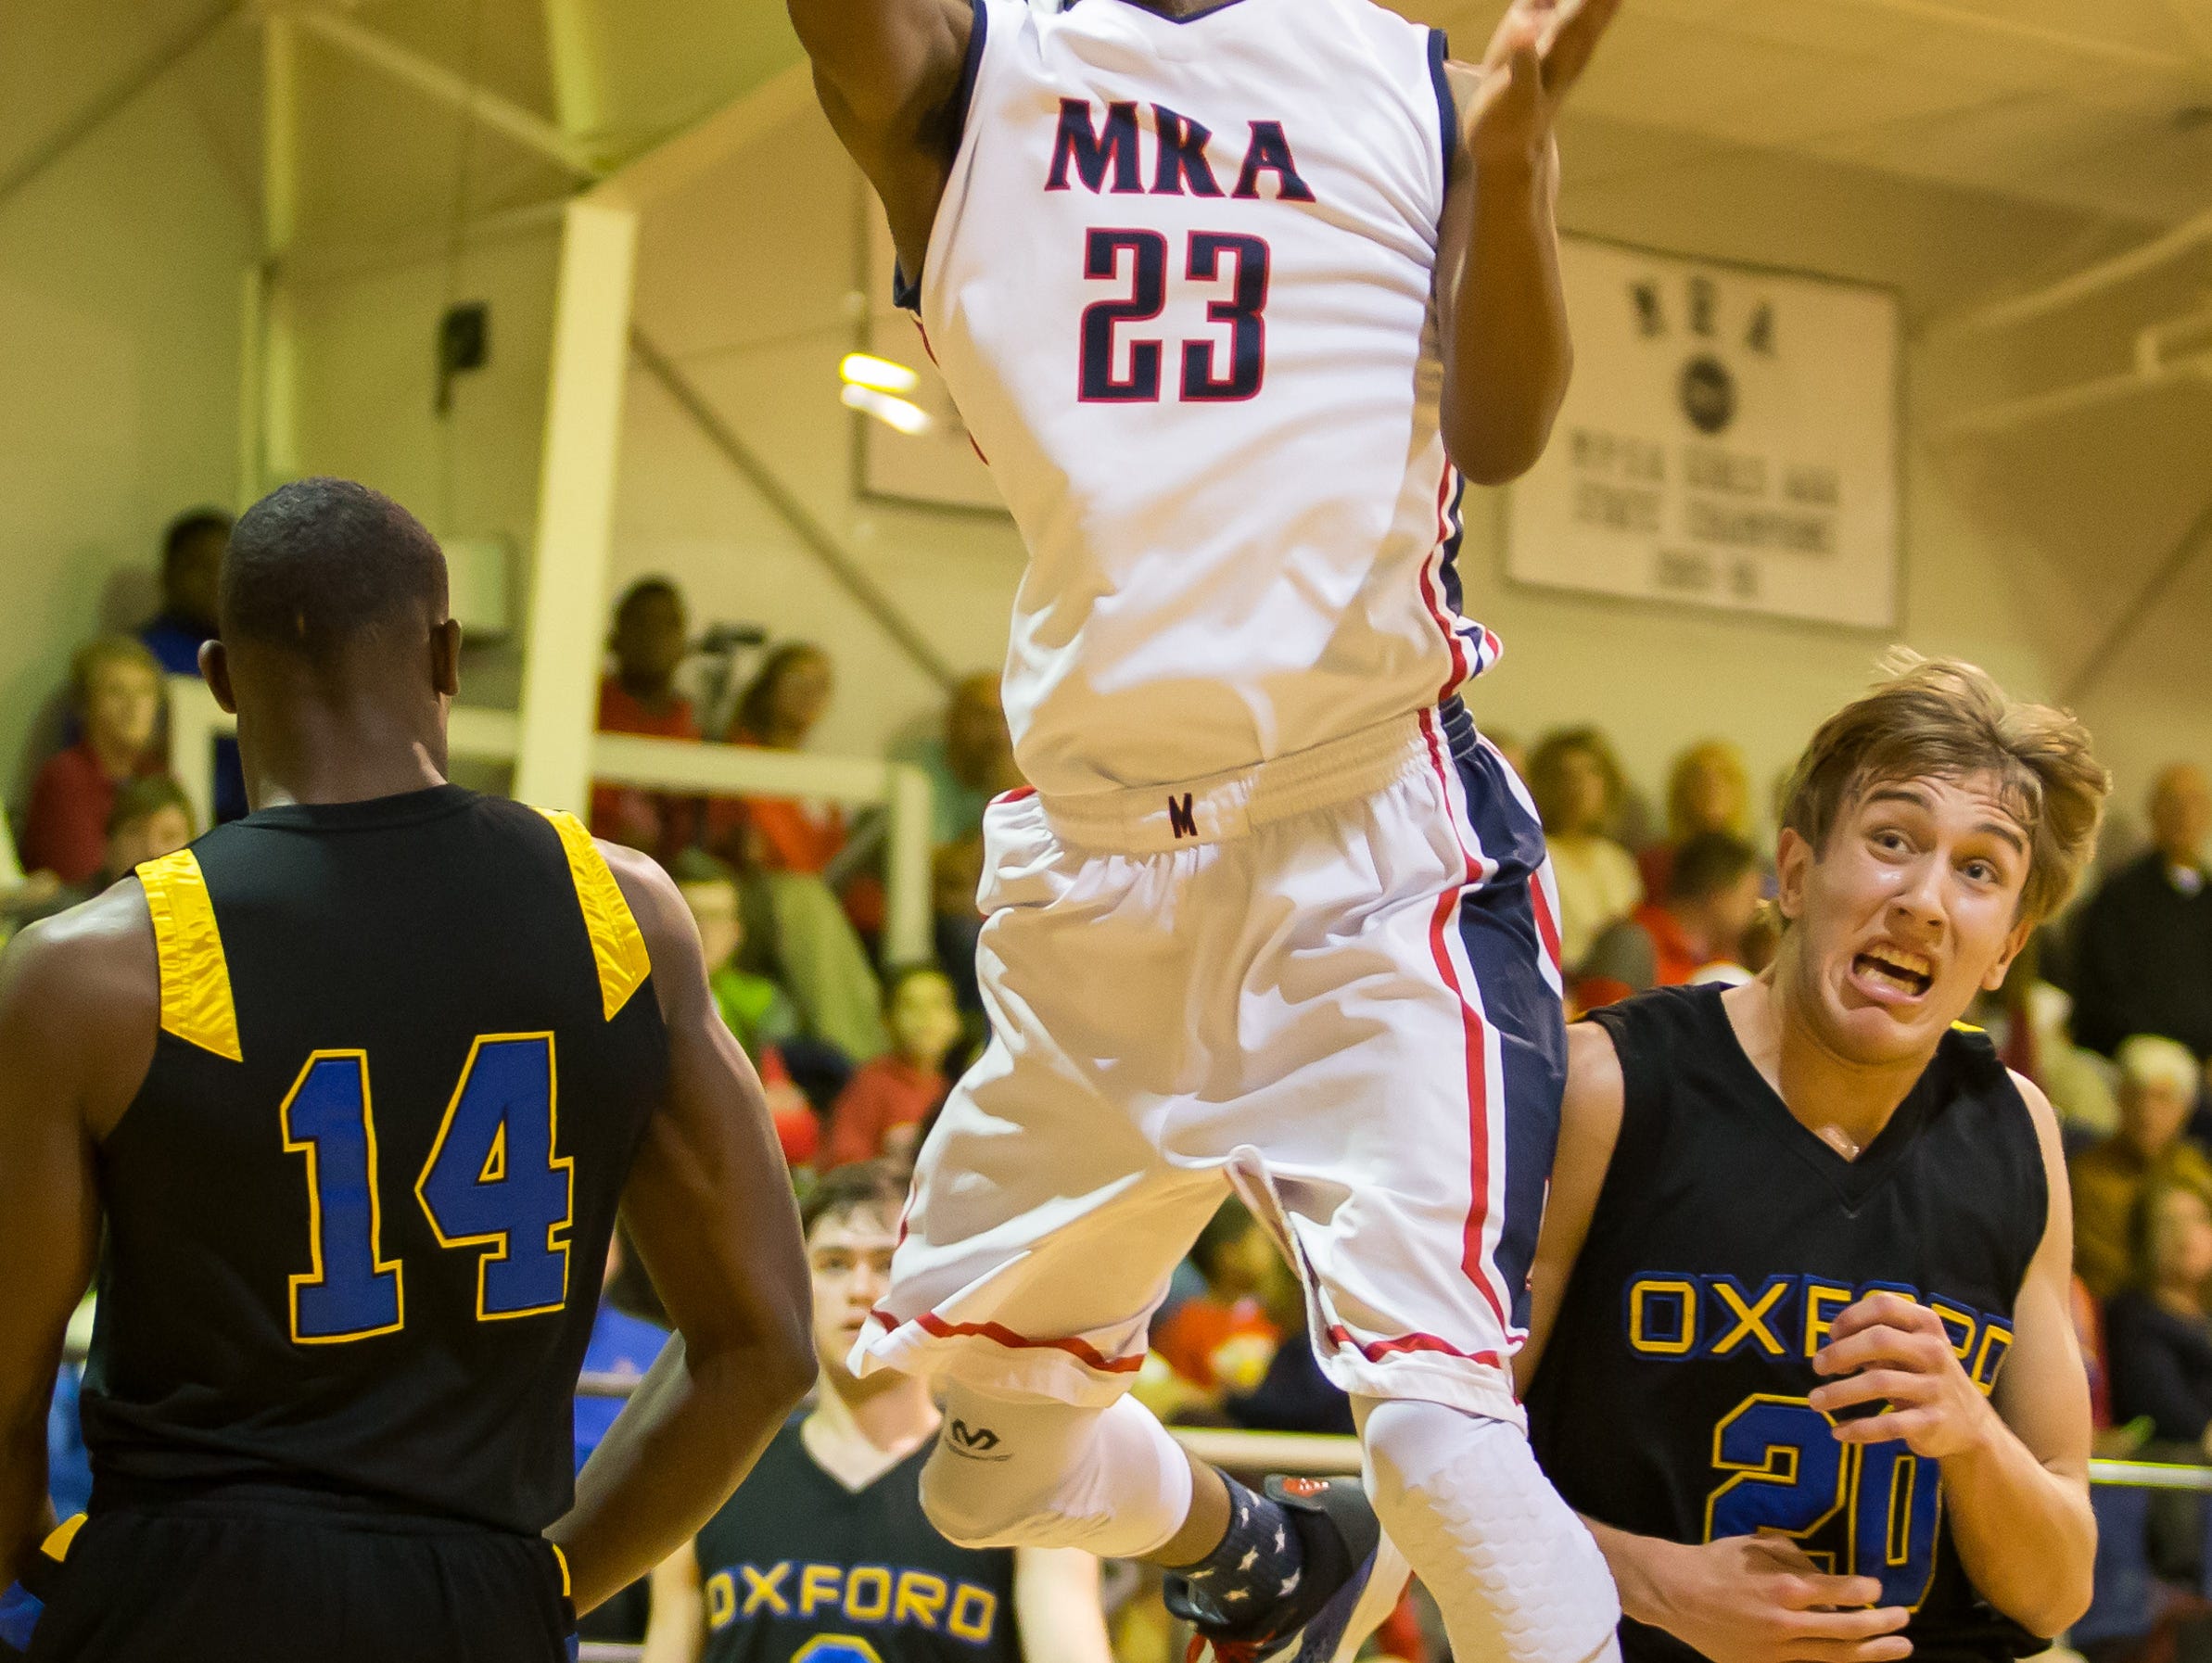 MRA’s Devin Gilmore was one of five players who were heavily considered for the Dandy Dozen.